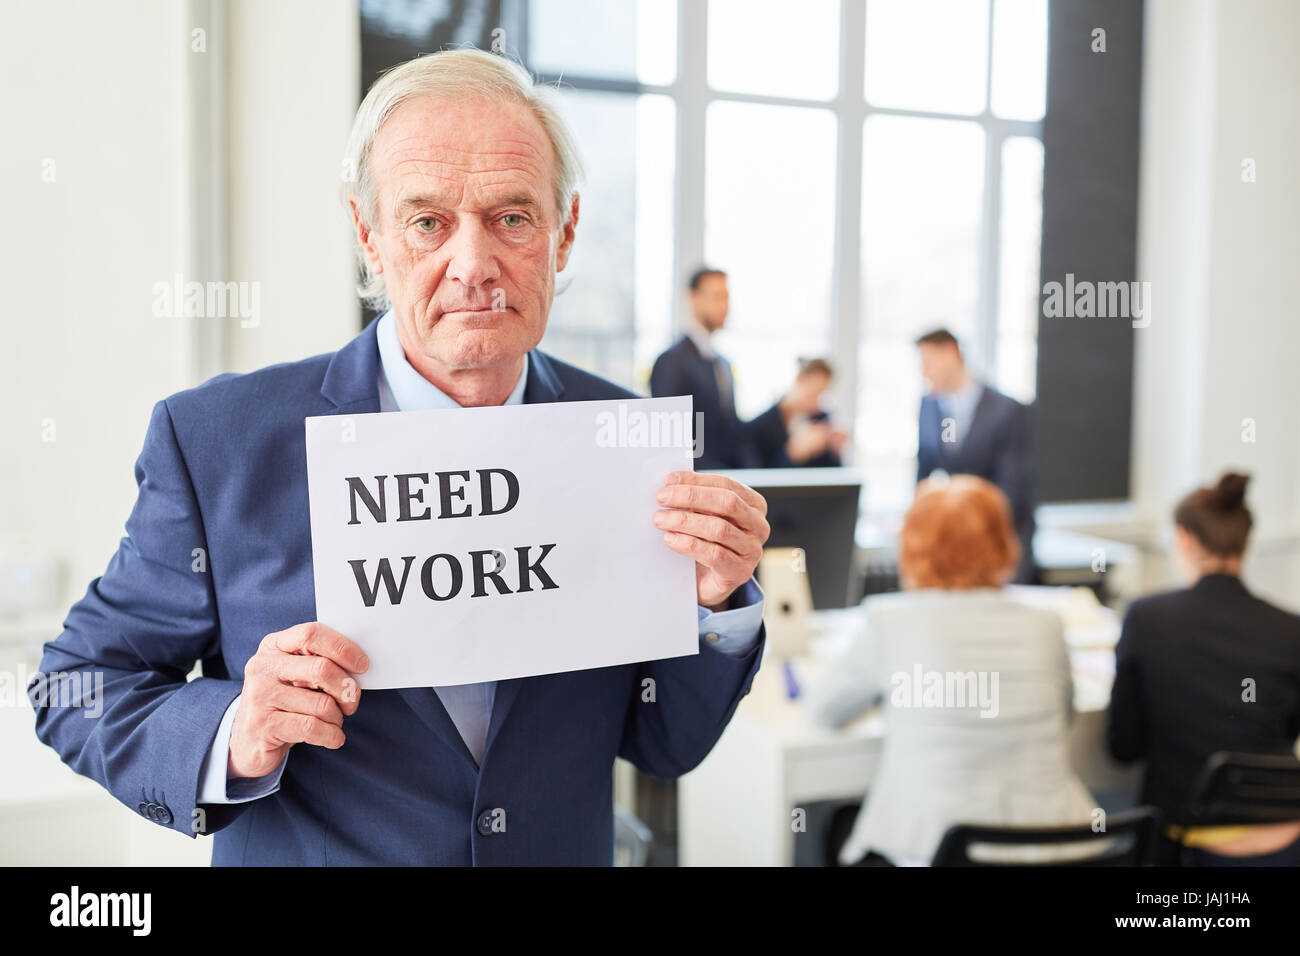 Unemployed senior as candidate looking for a job Stock Photo